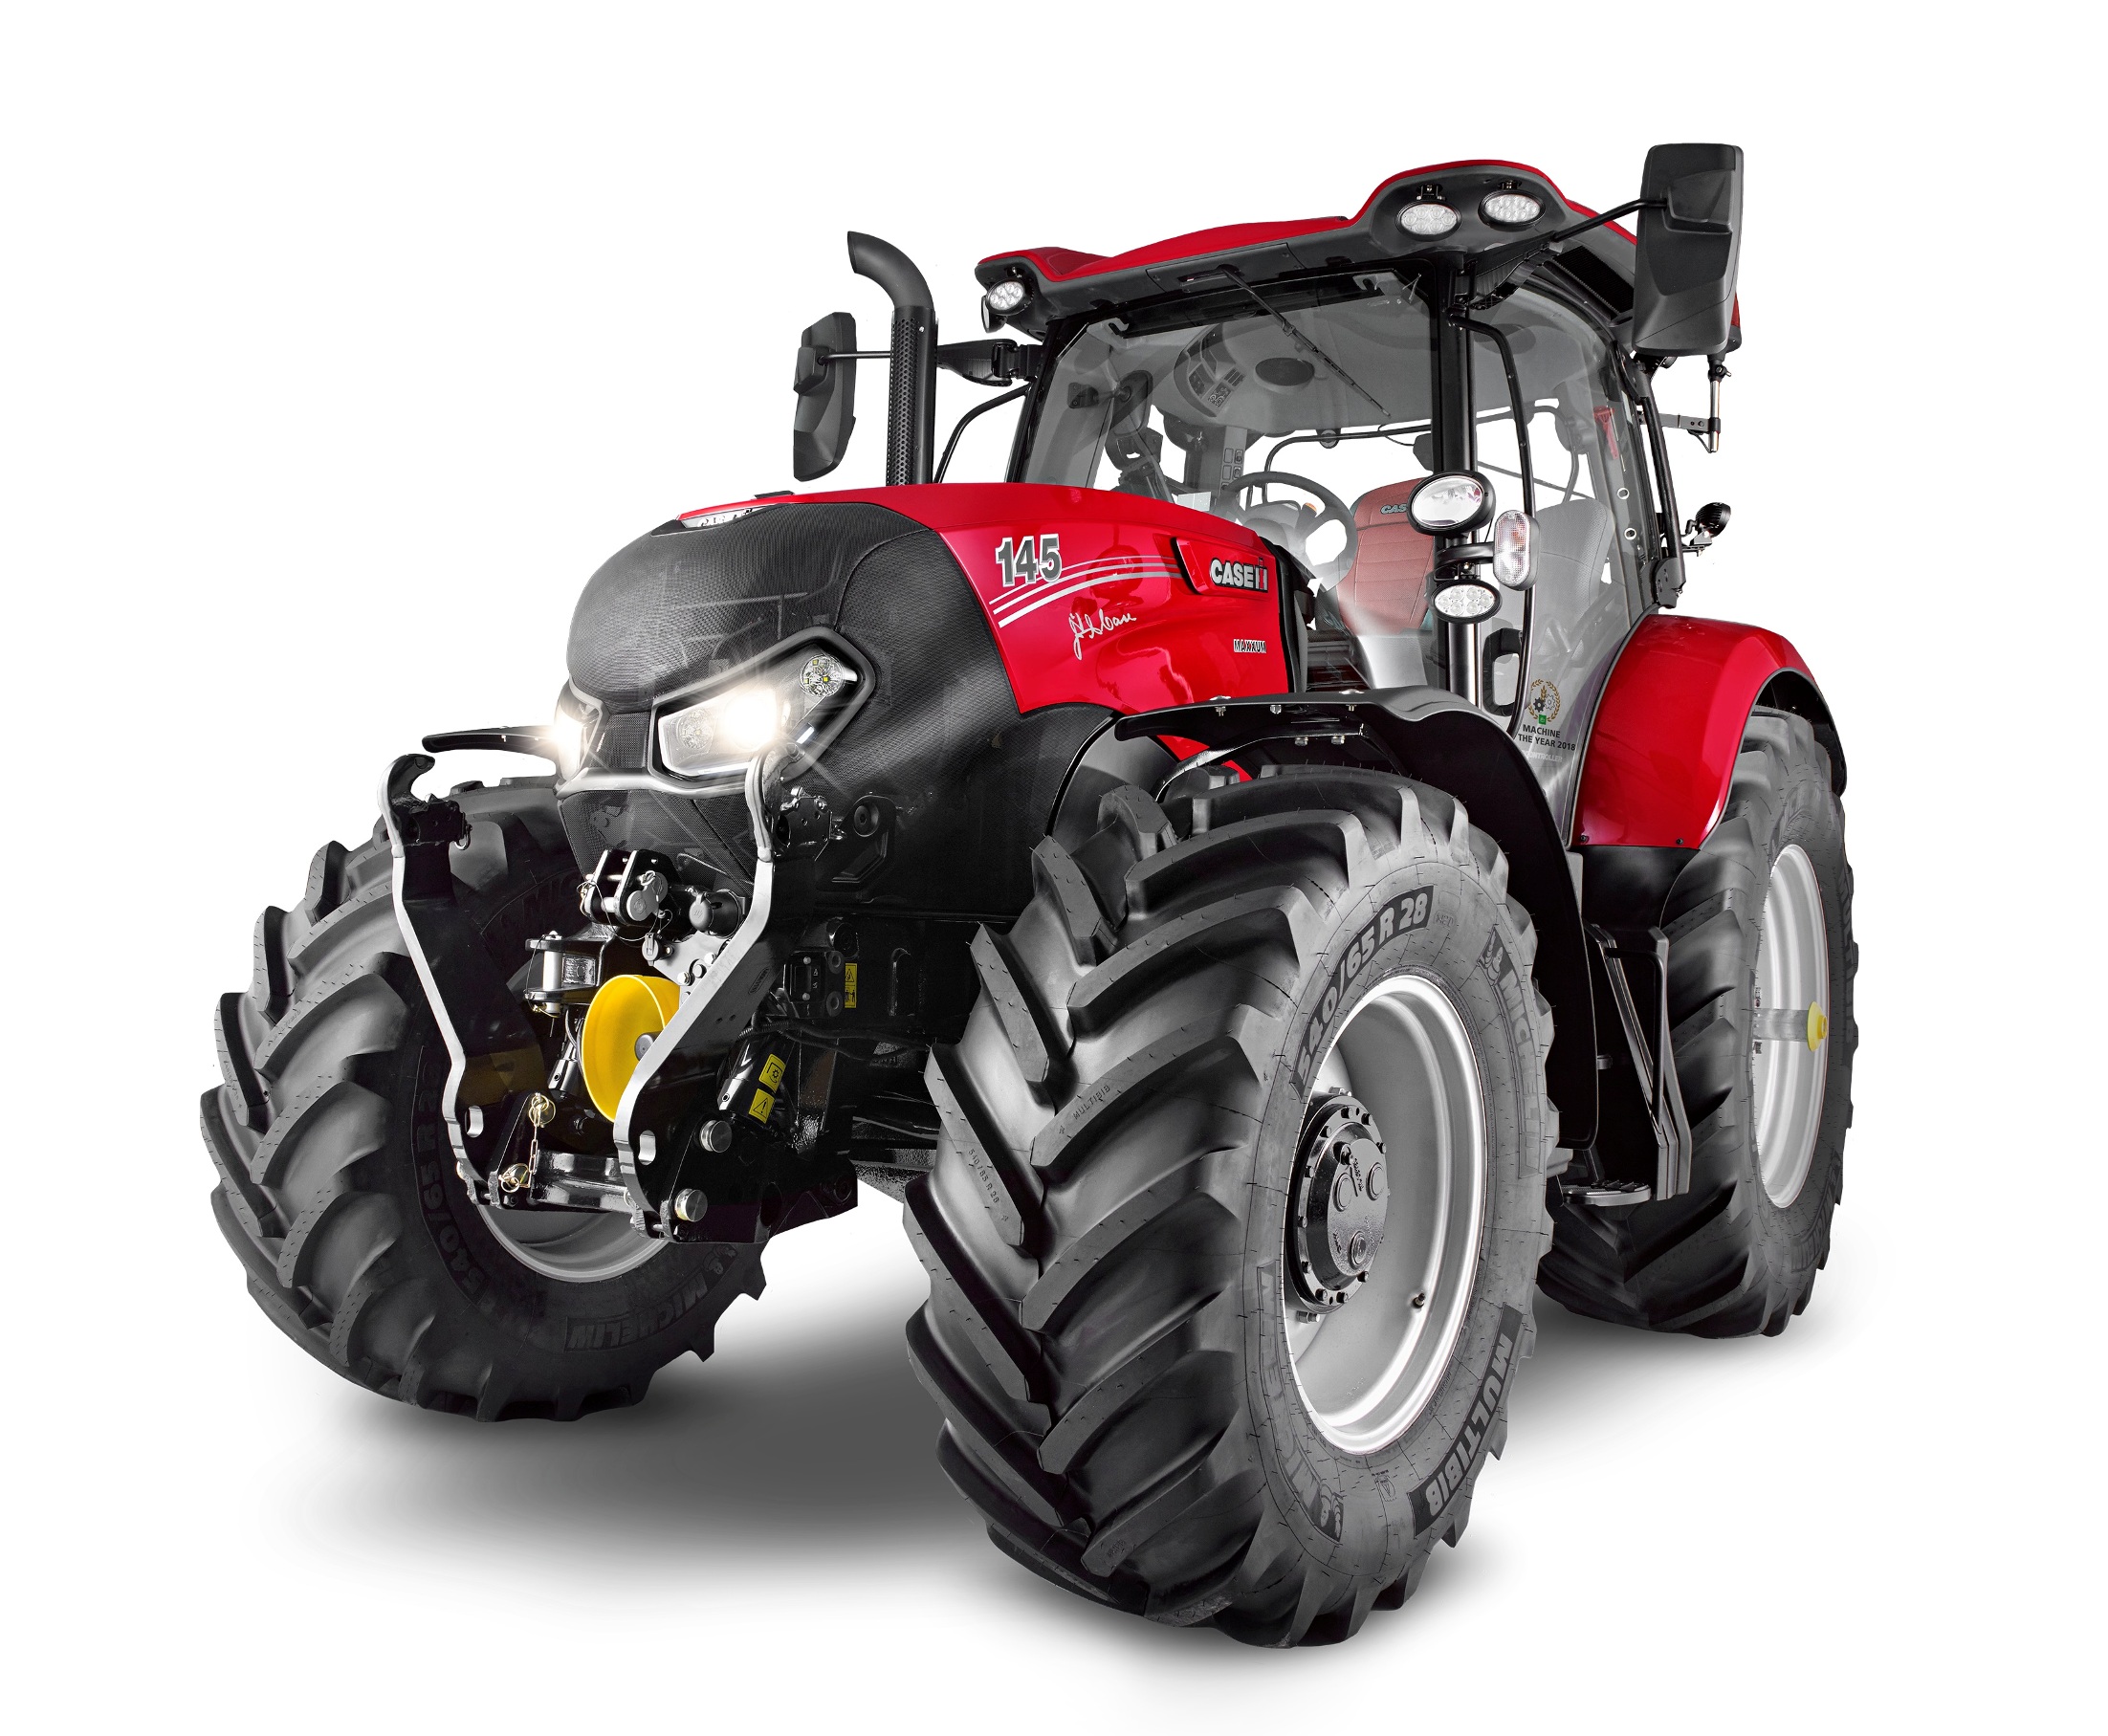 Maxxum agricultural equipment benefits from the latest in test and validation capabilities